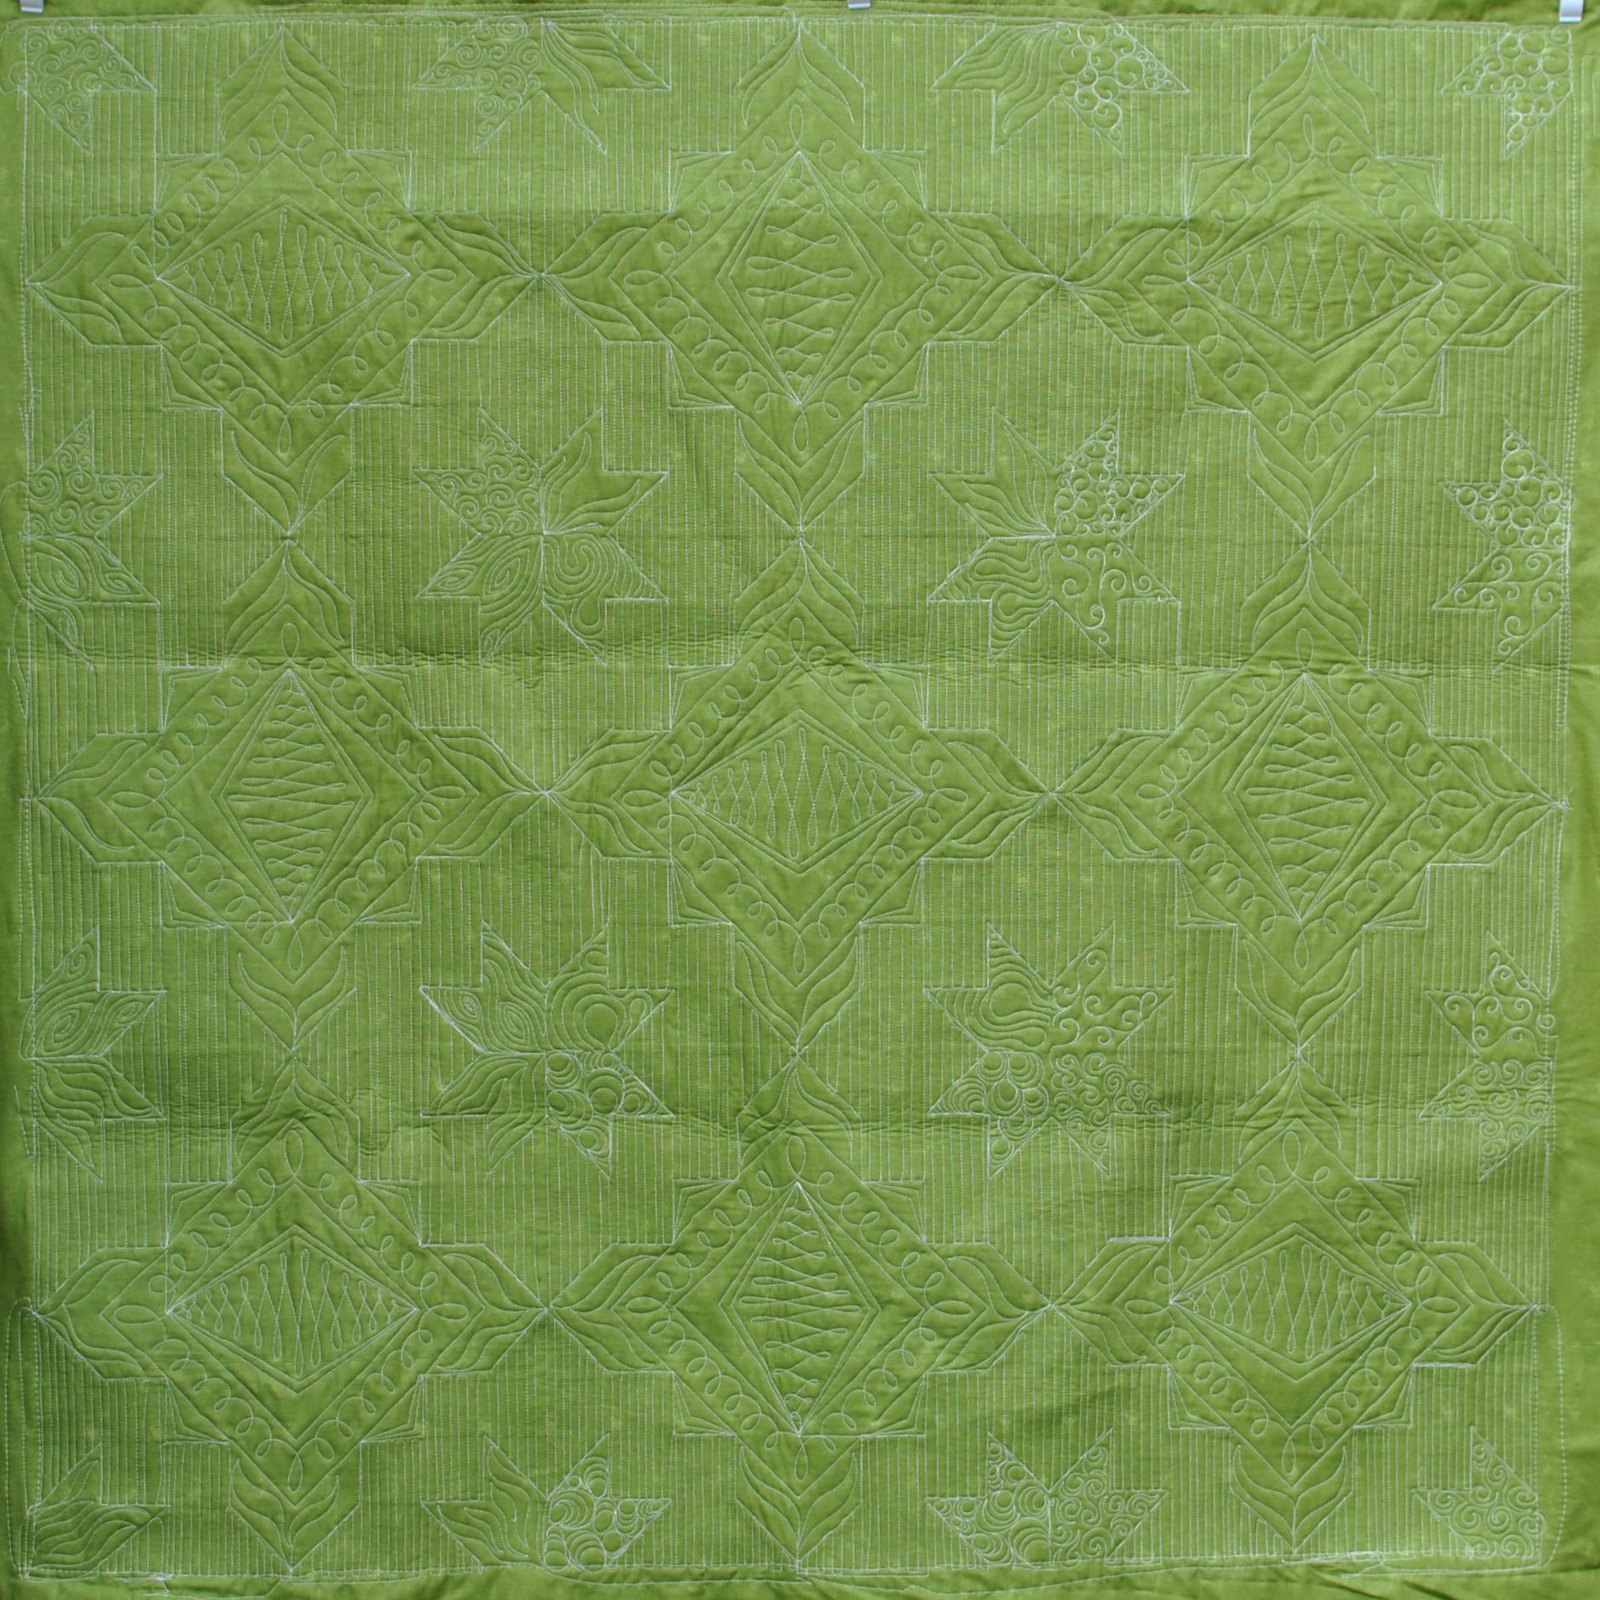 Quilted Florentine for Sew Many Creations